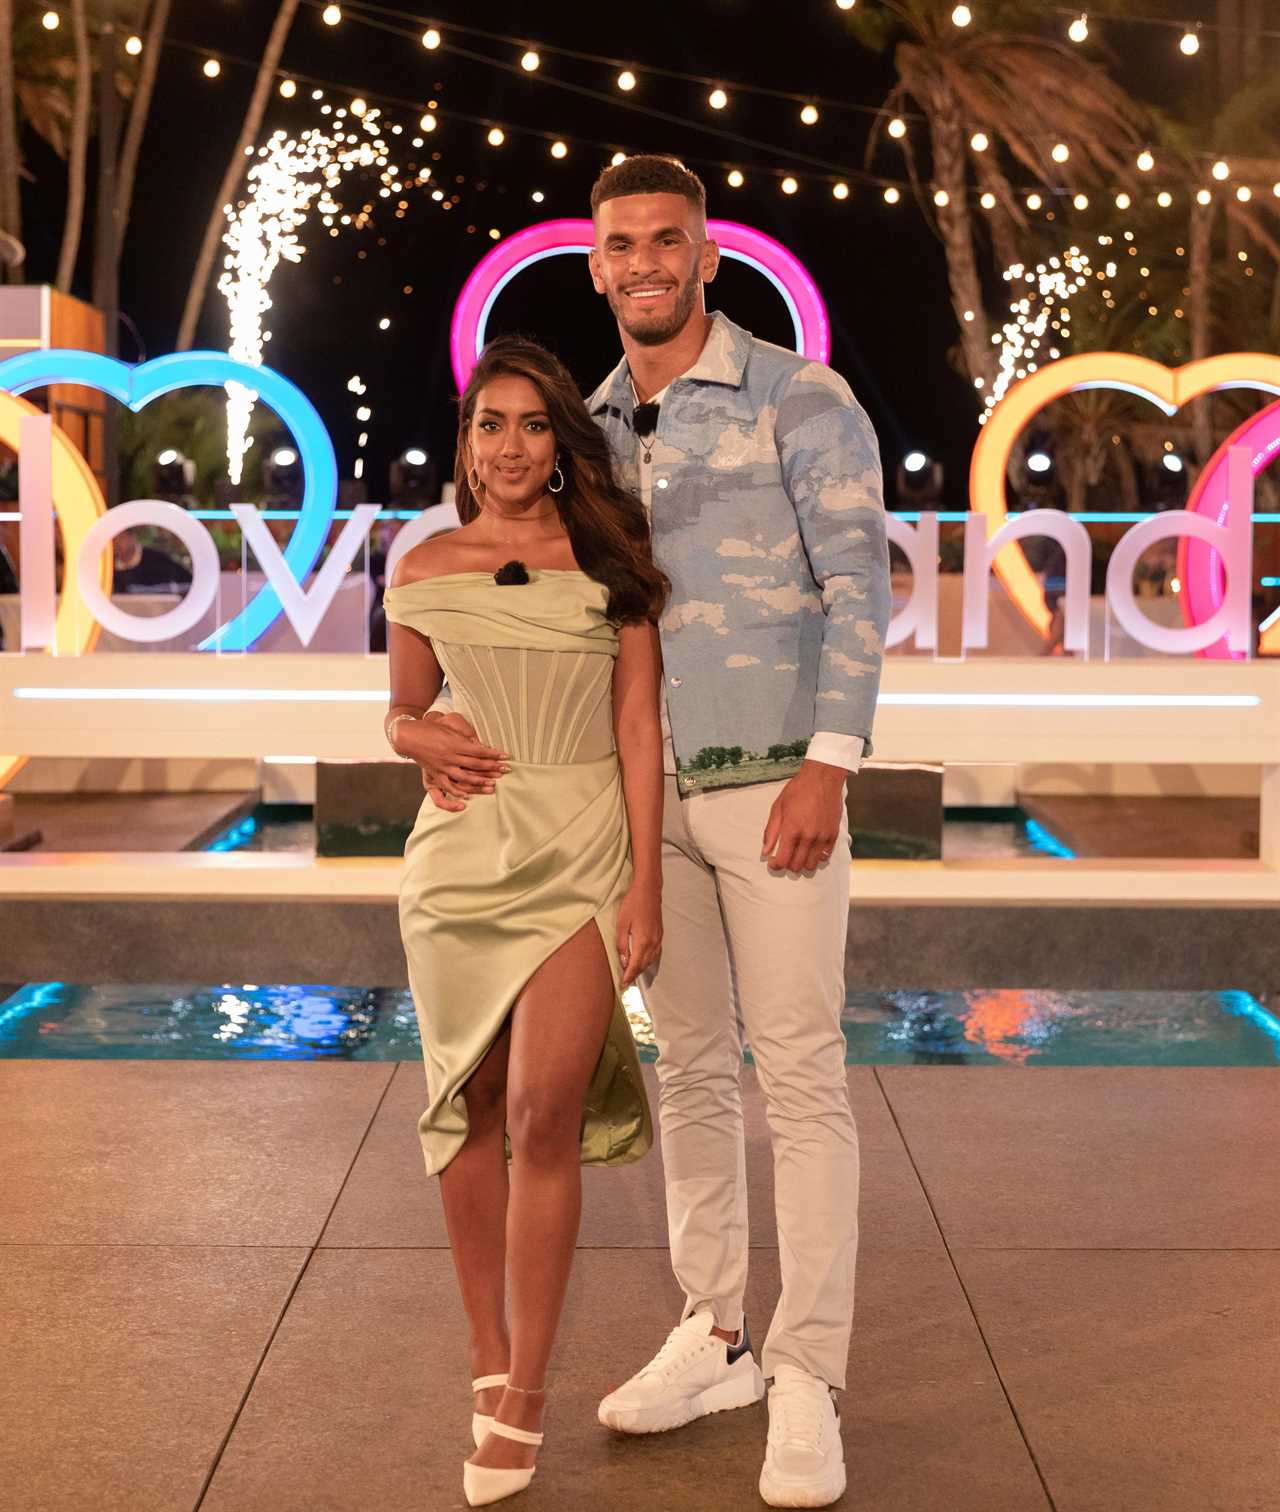 Love Island’s ‘real winner’ revealed as most followed contestant on Instagram is named